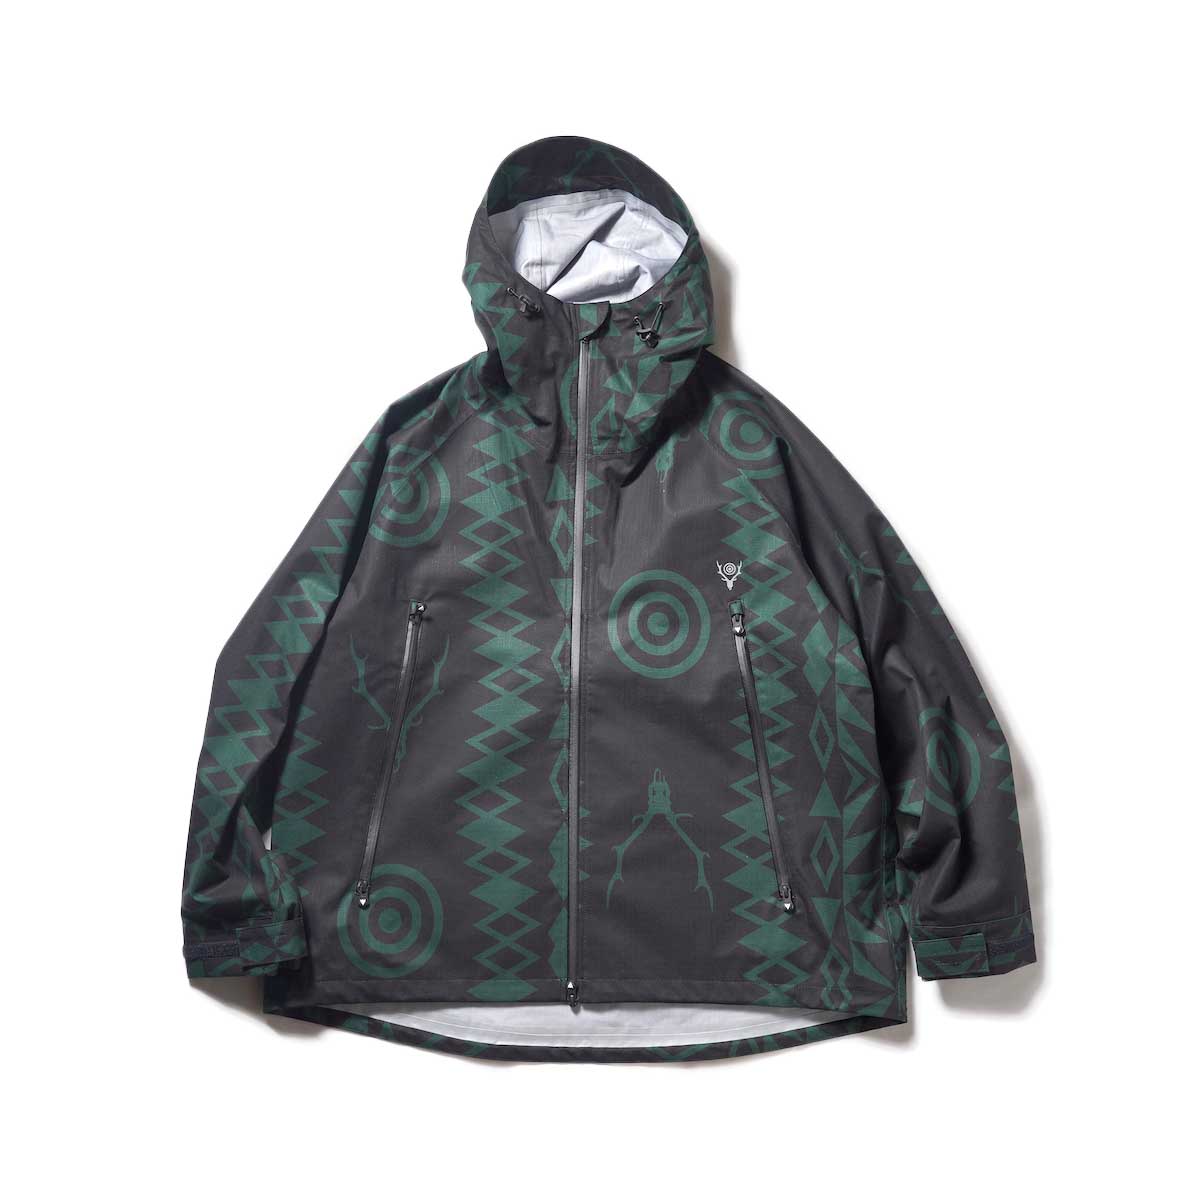 South2 West8 / WEATHER EFFECT JACKET - COTTON RIPSTOP / 3LAYER (Skull&amp;amp;amp;Target)